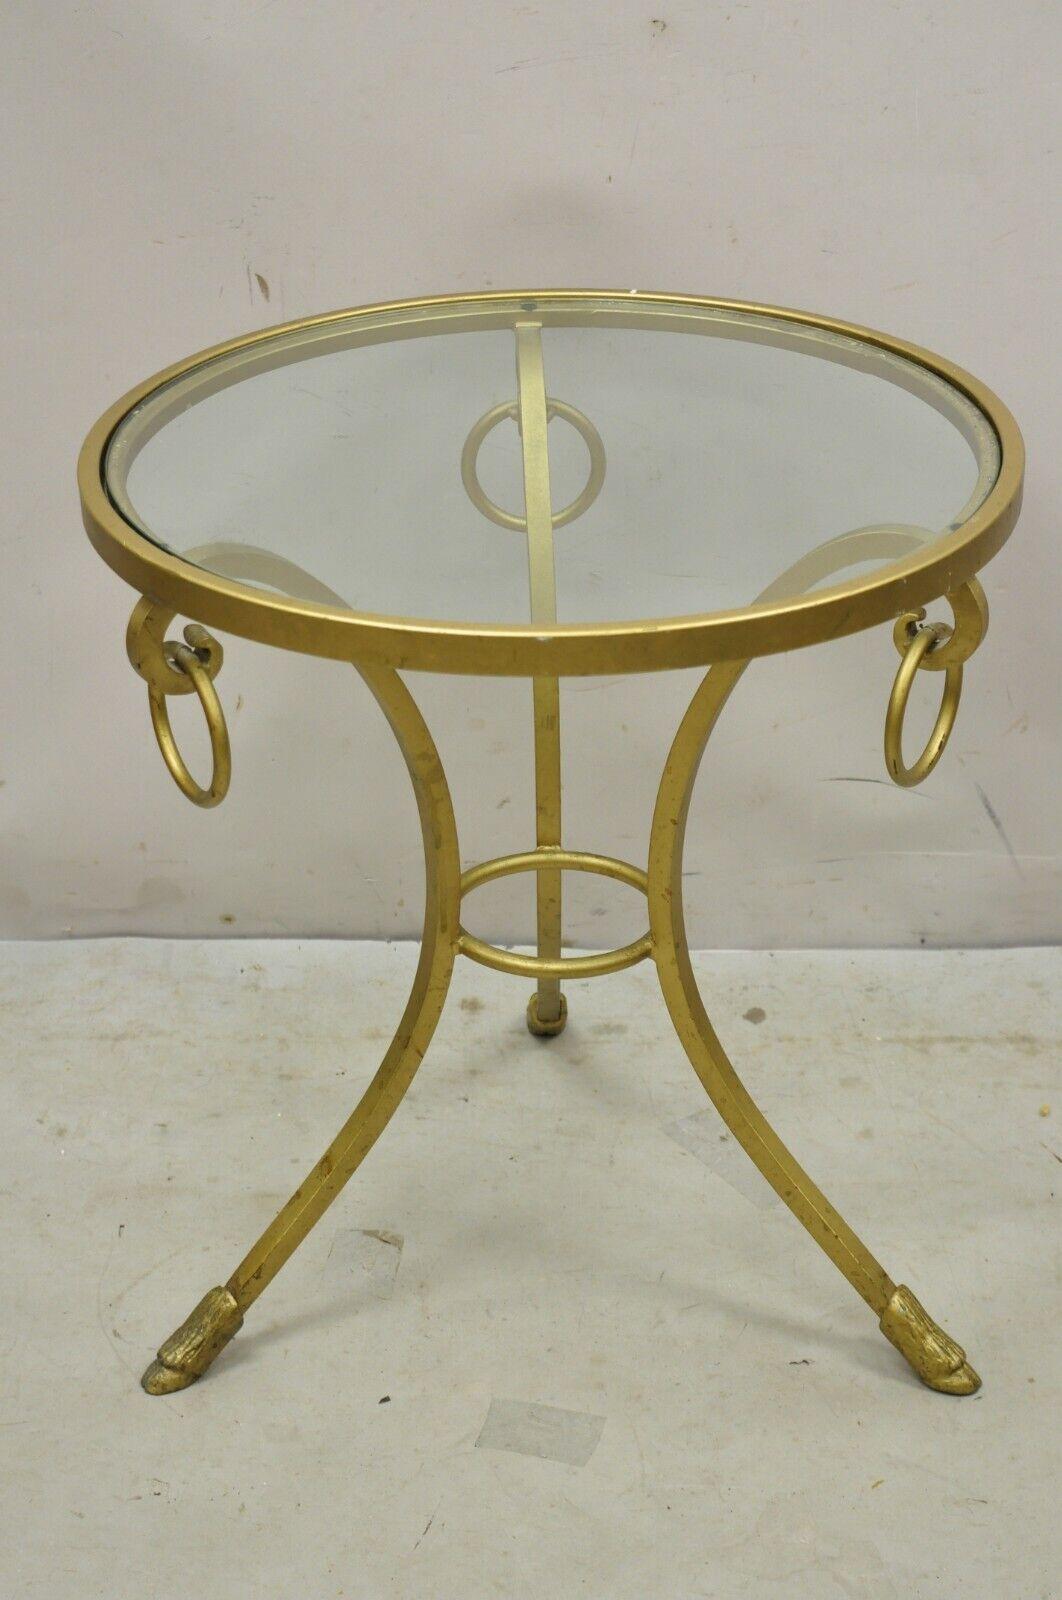 Decorator Gold Italian Neoclassical Style Hoof Foot Round Occasional Side Table Item features an Inset round glass top, tripod base with hoof feet, drop ring accents, gold painted finish, great style and form. Circa Late 20th Century. Measurements: